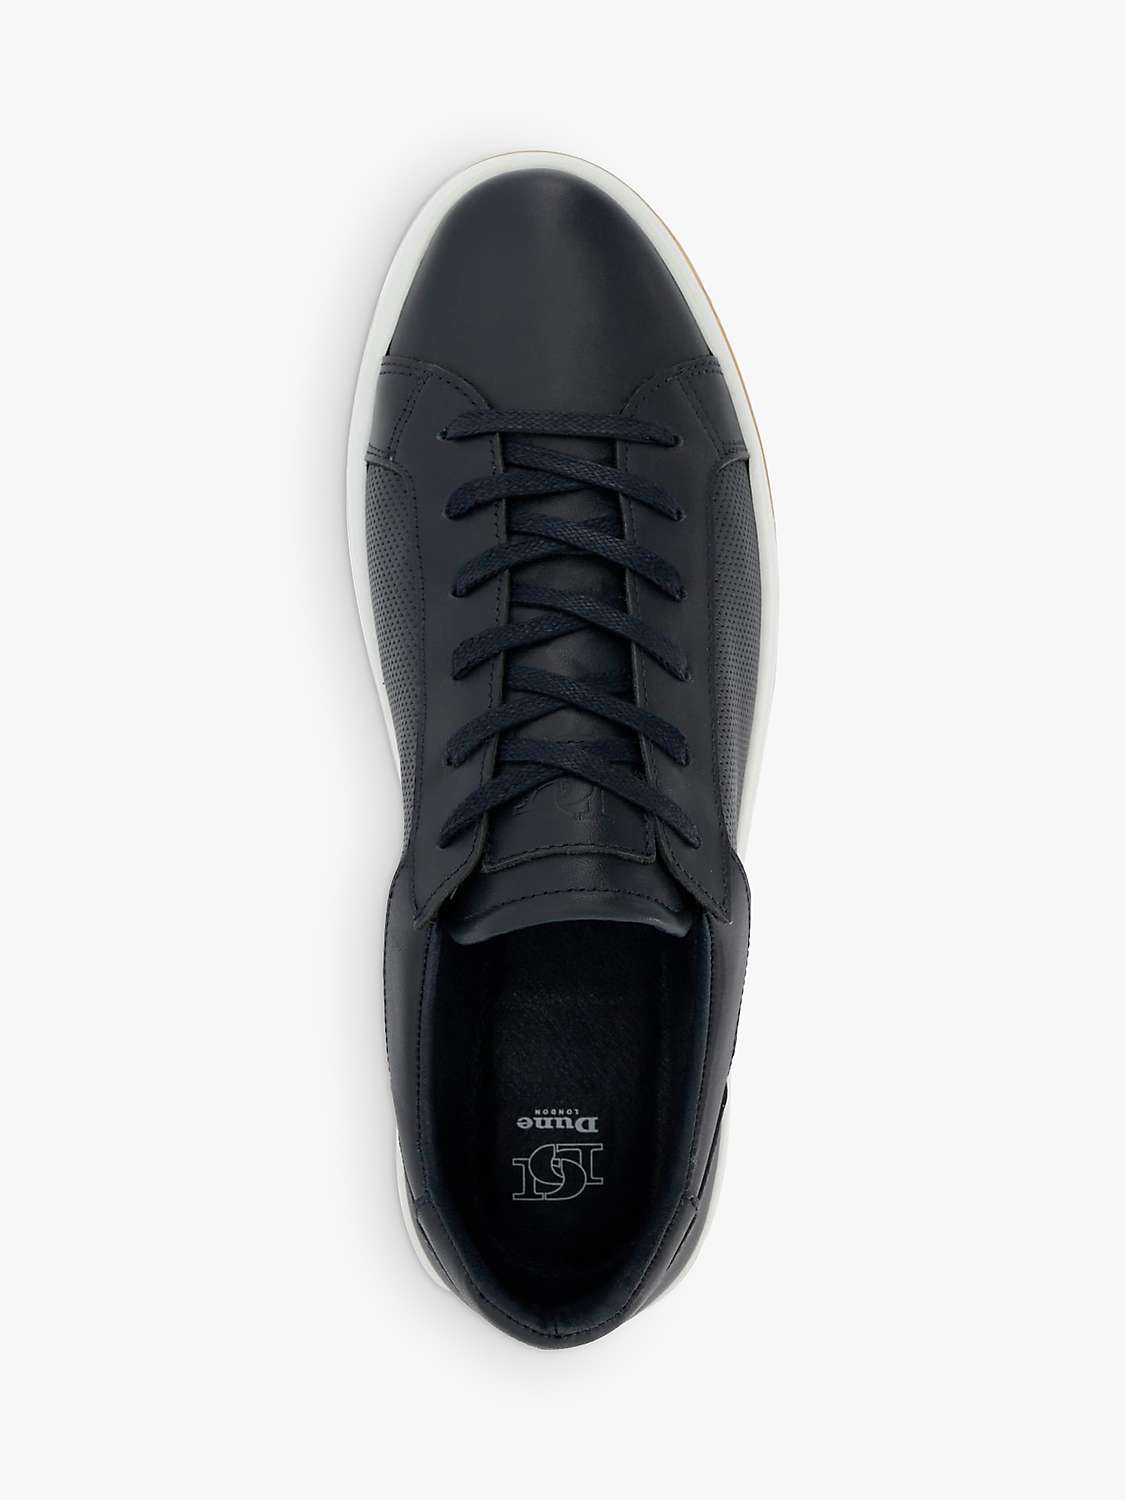 Dune Tie Leather Black Trainers, Navy at John Lewis & Partners